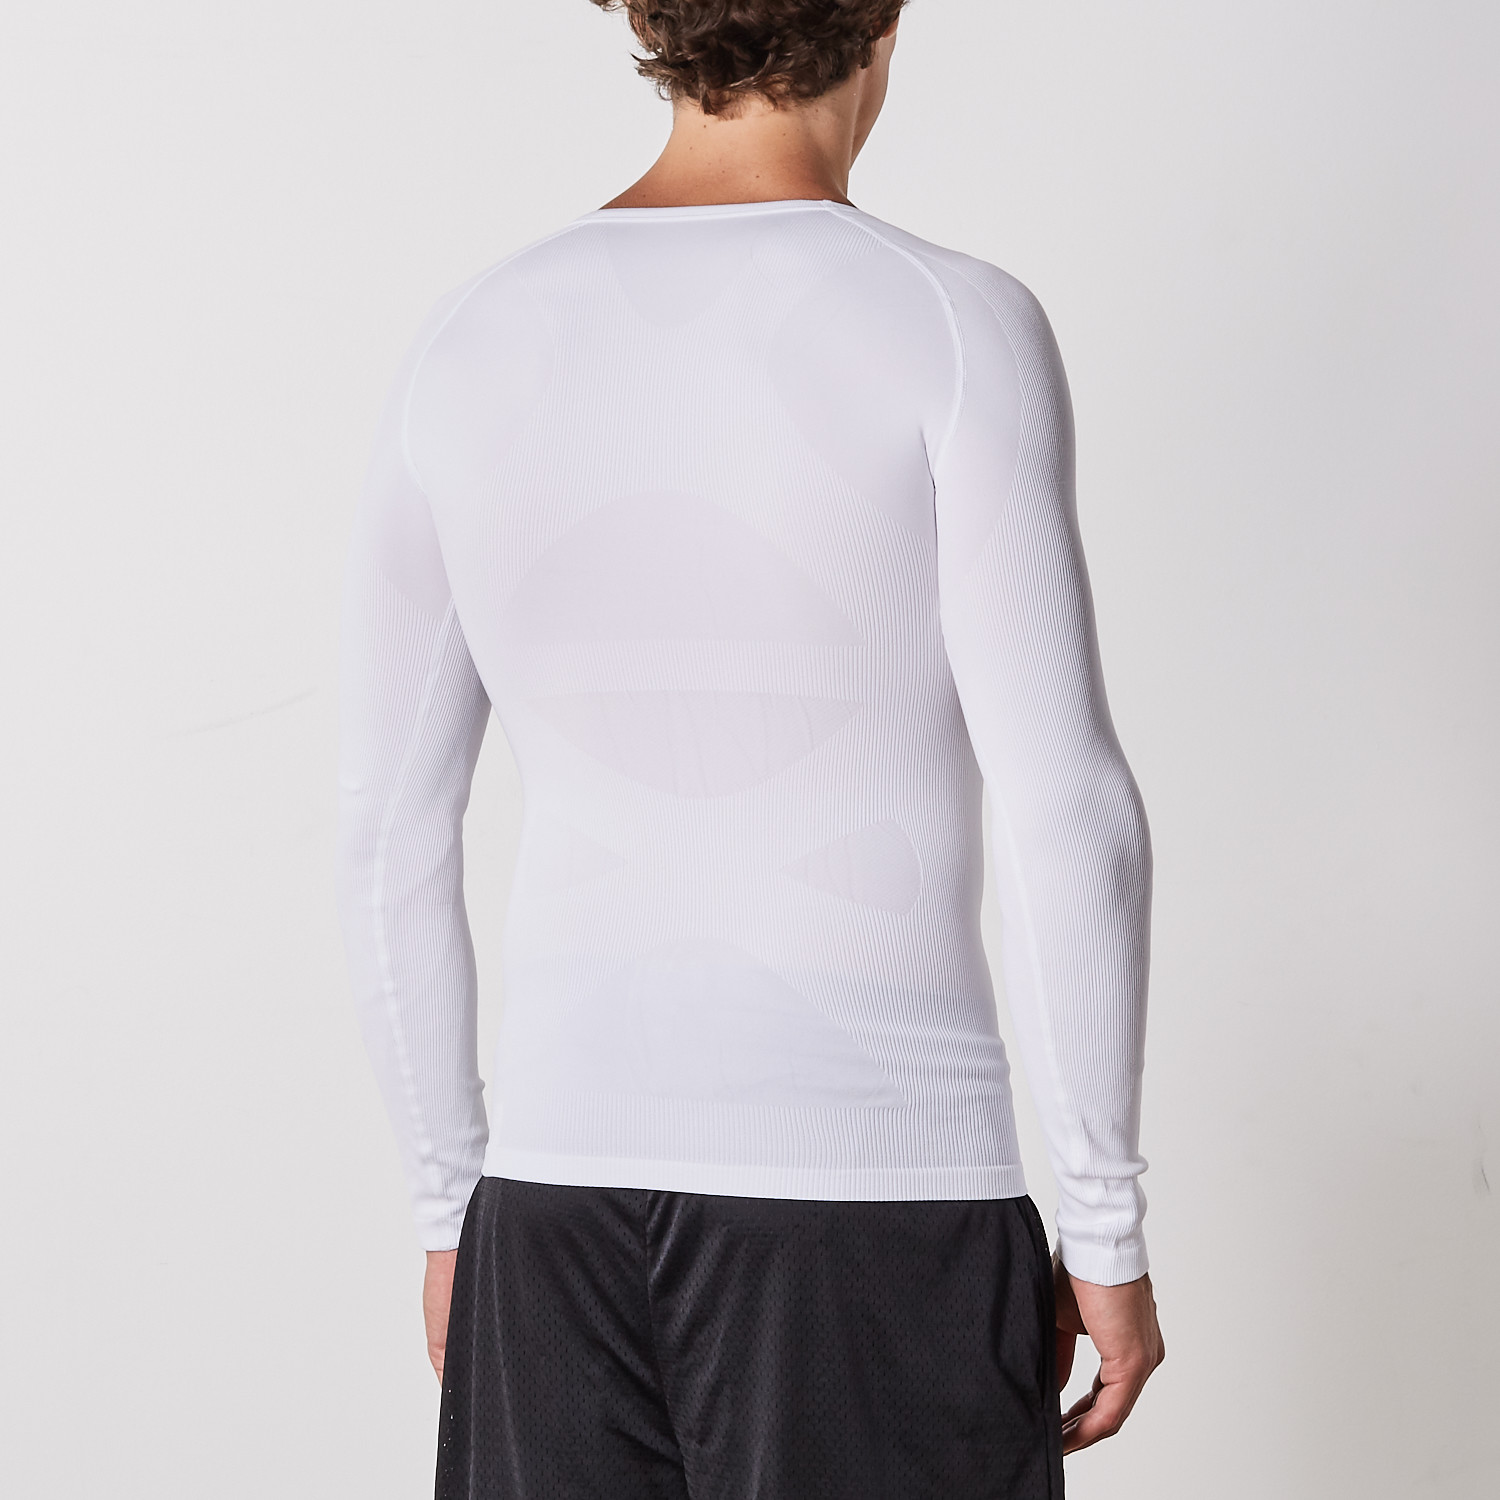 Men’s Compression Long Sleeve Shirt // White (Small) - Extreme Fit ...